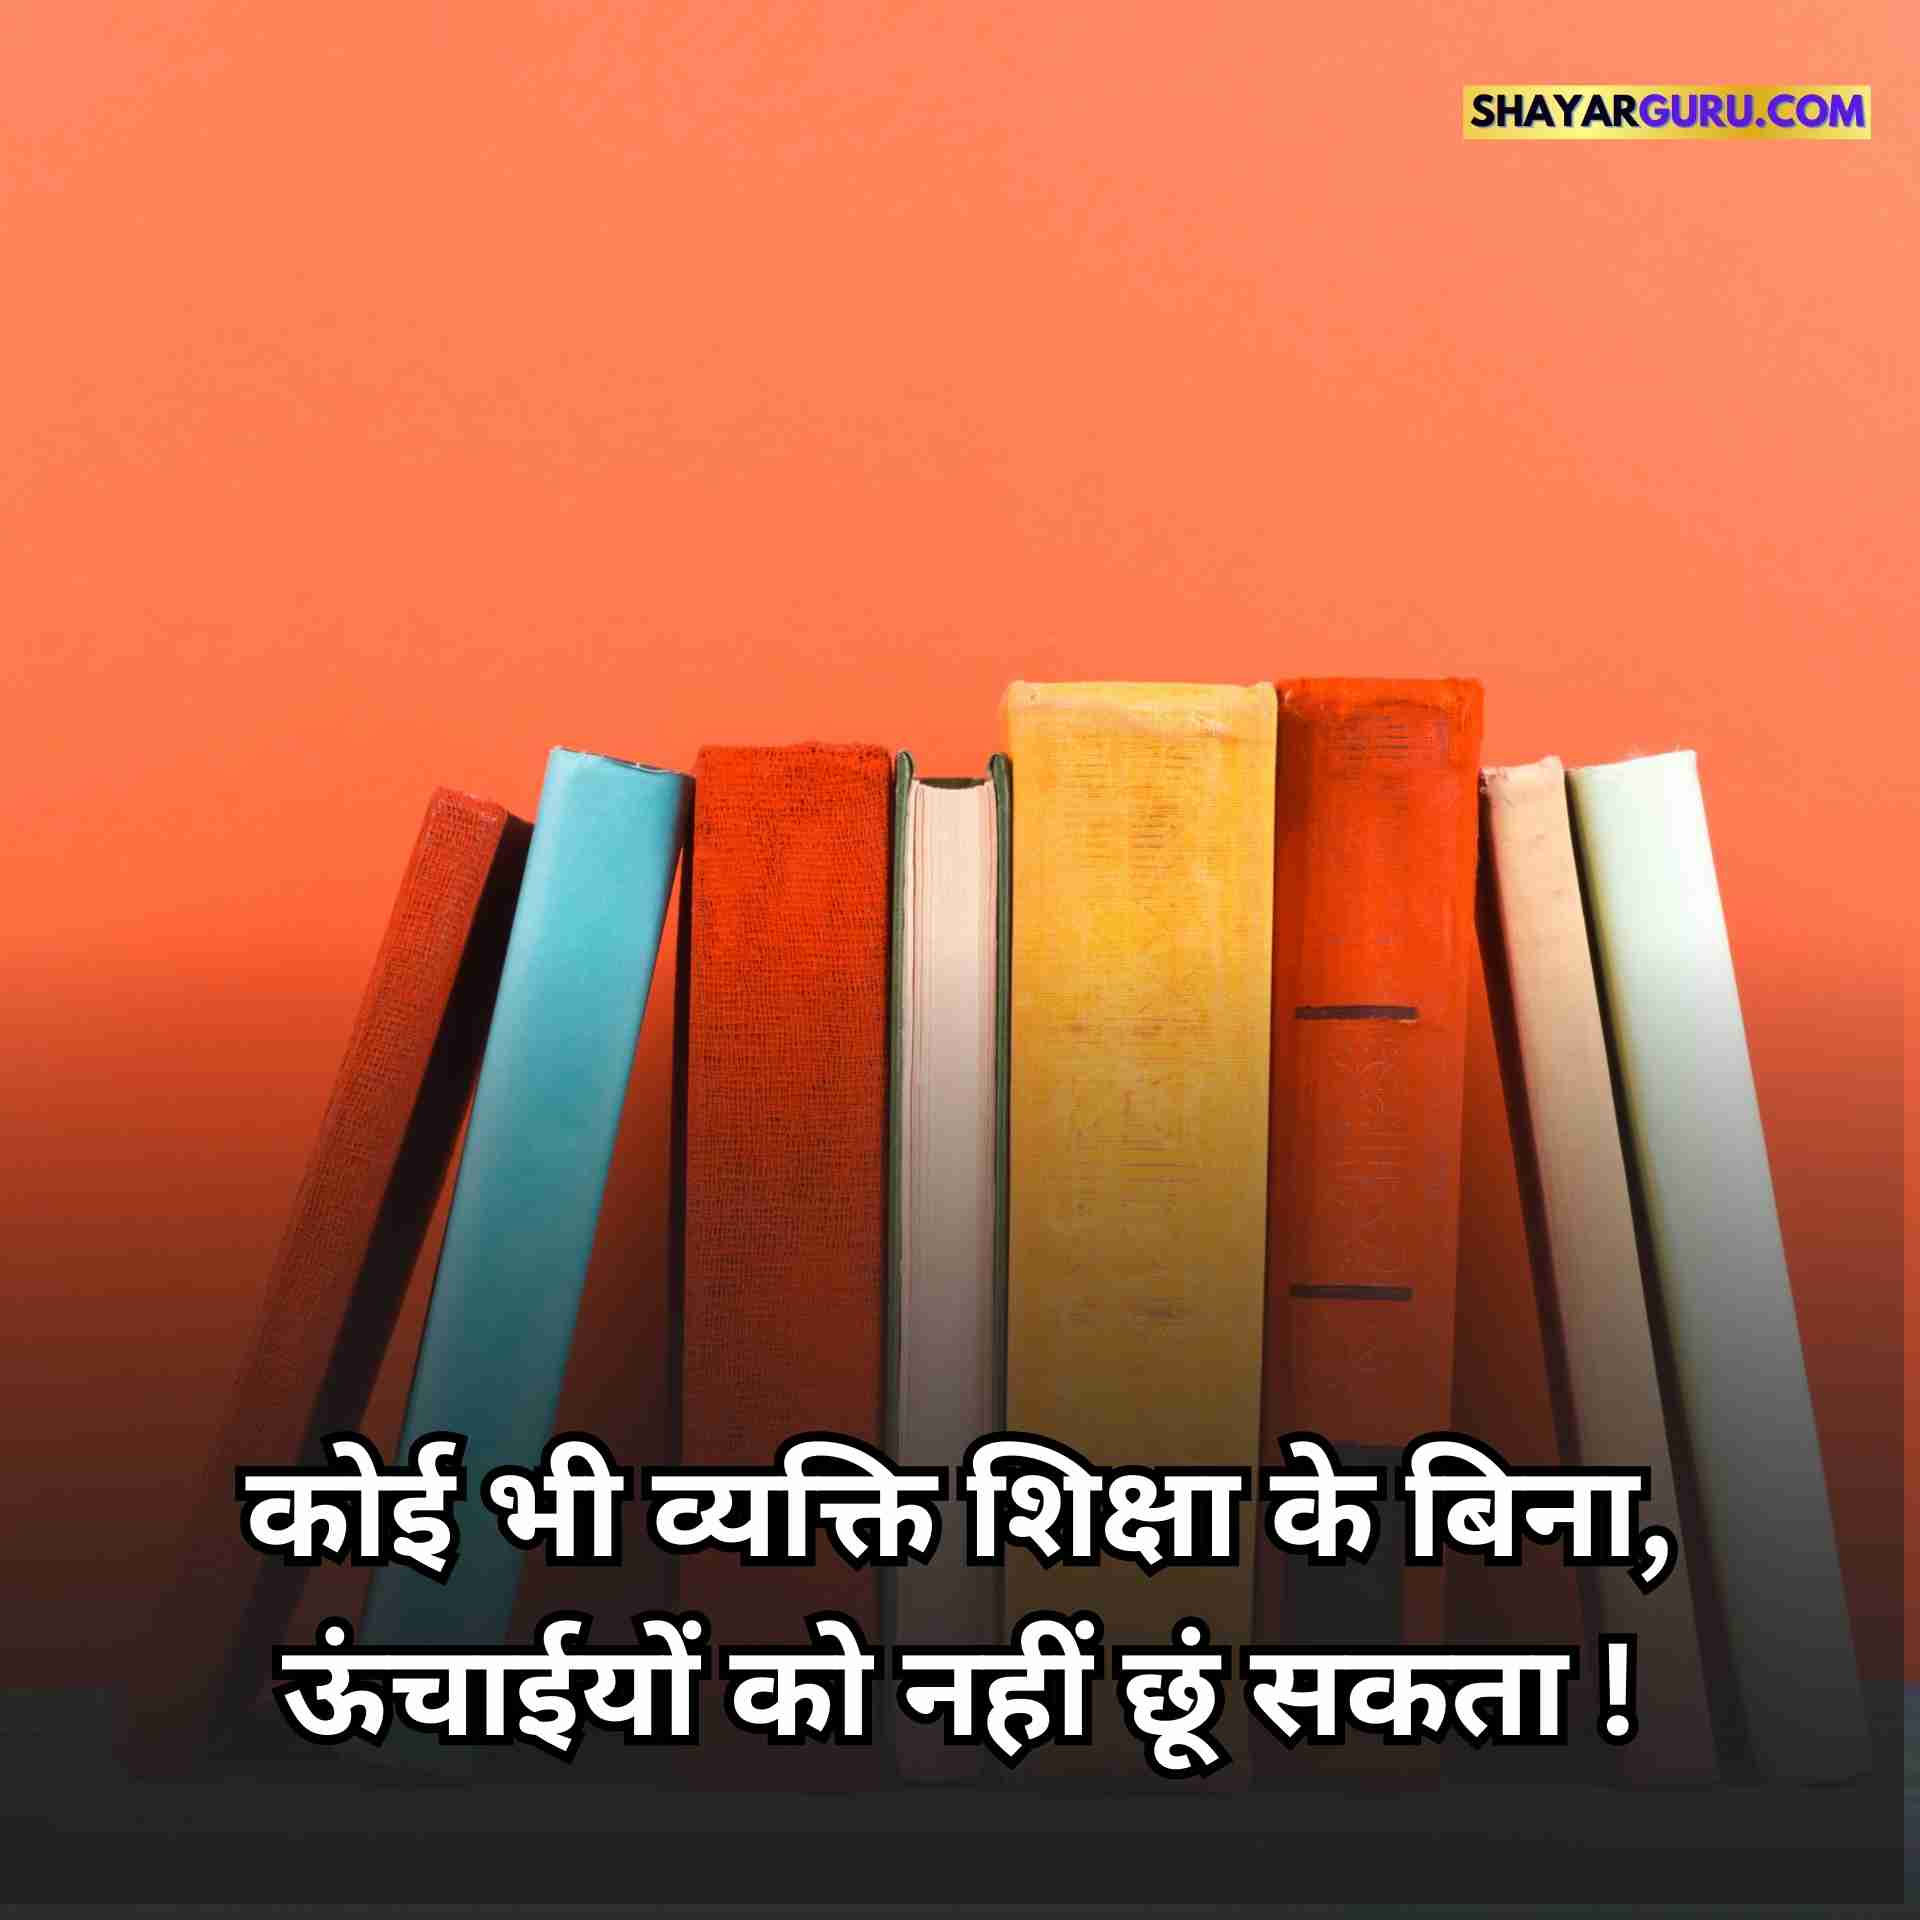 Best Education Quotes in Hindi